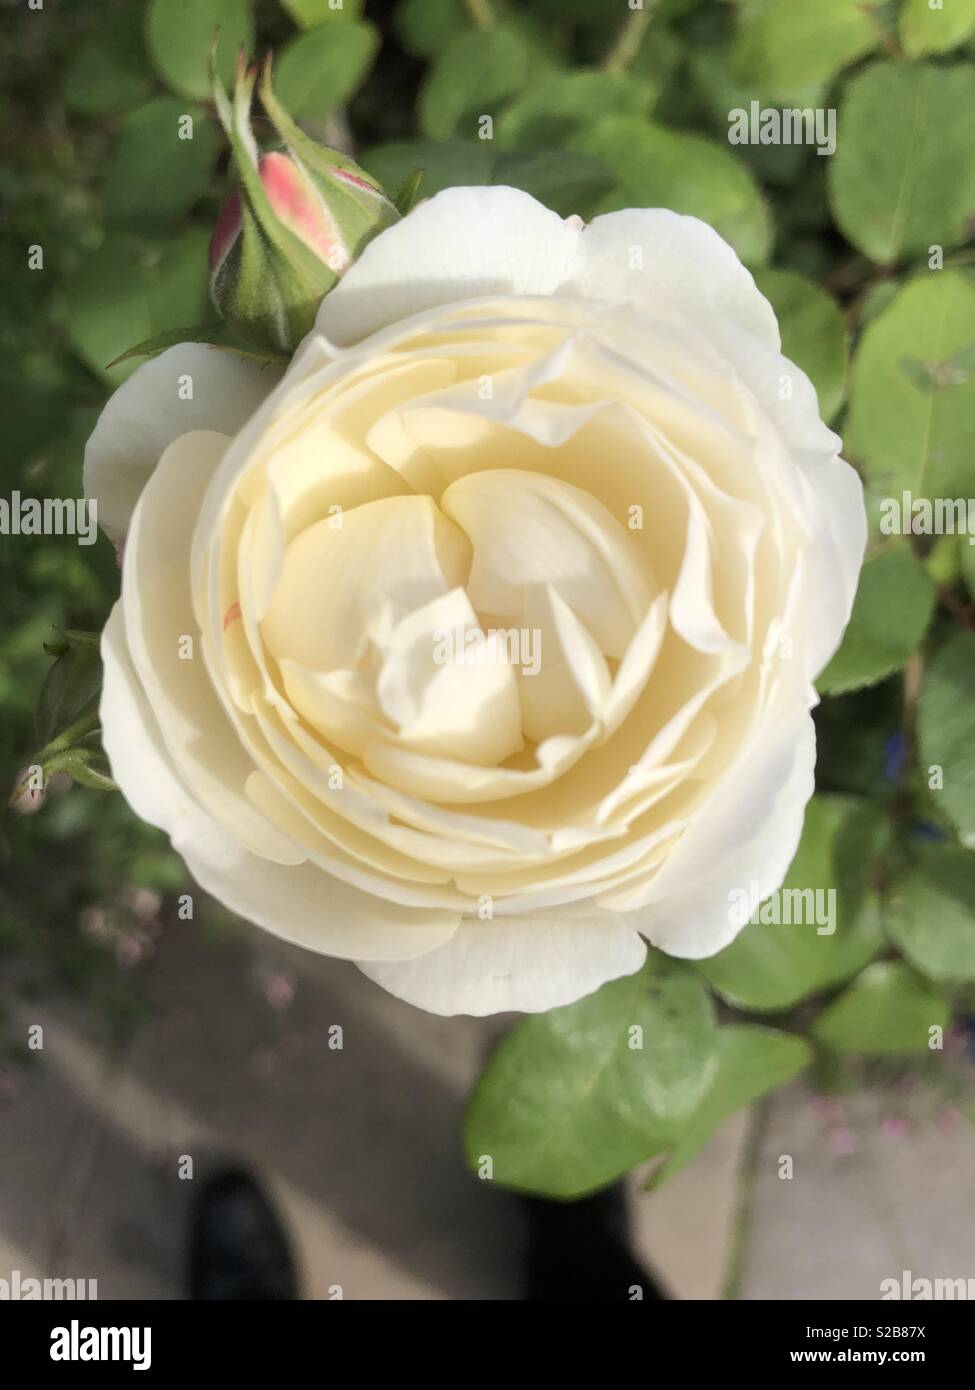 A sparkling cream rose in absolutely tip top condition, for us to enjoy and view in its prime. Stock Photo